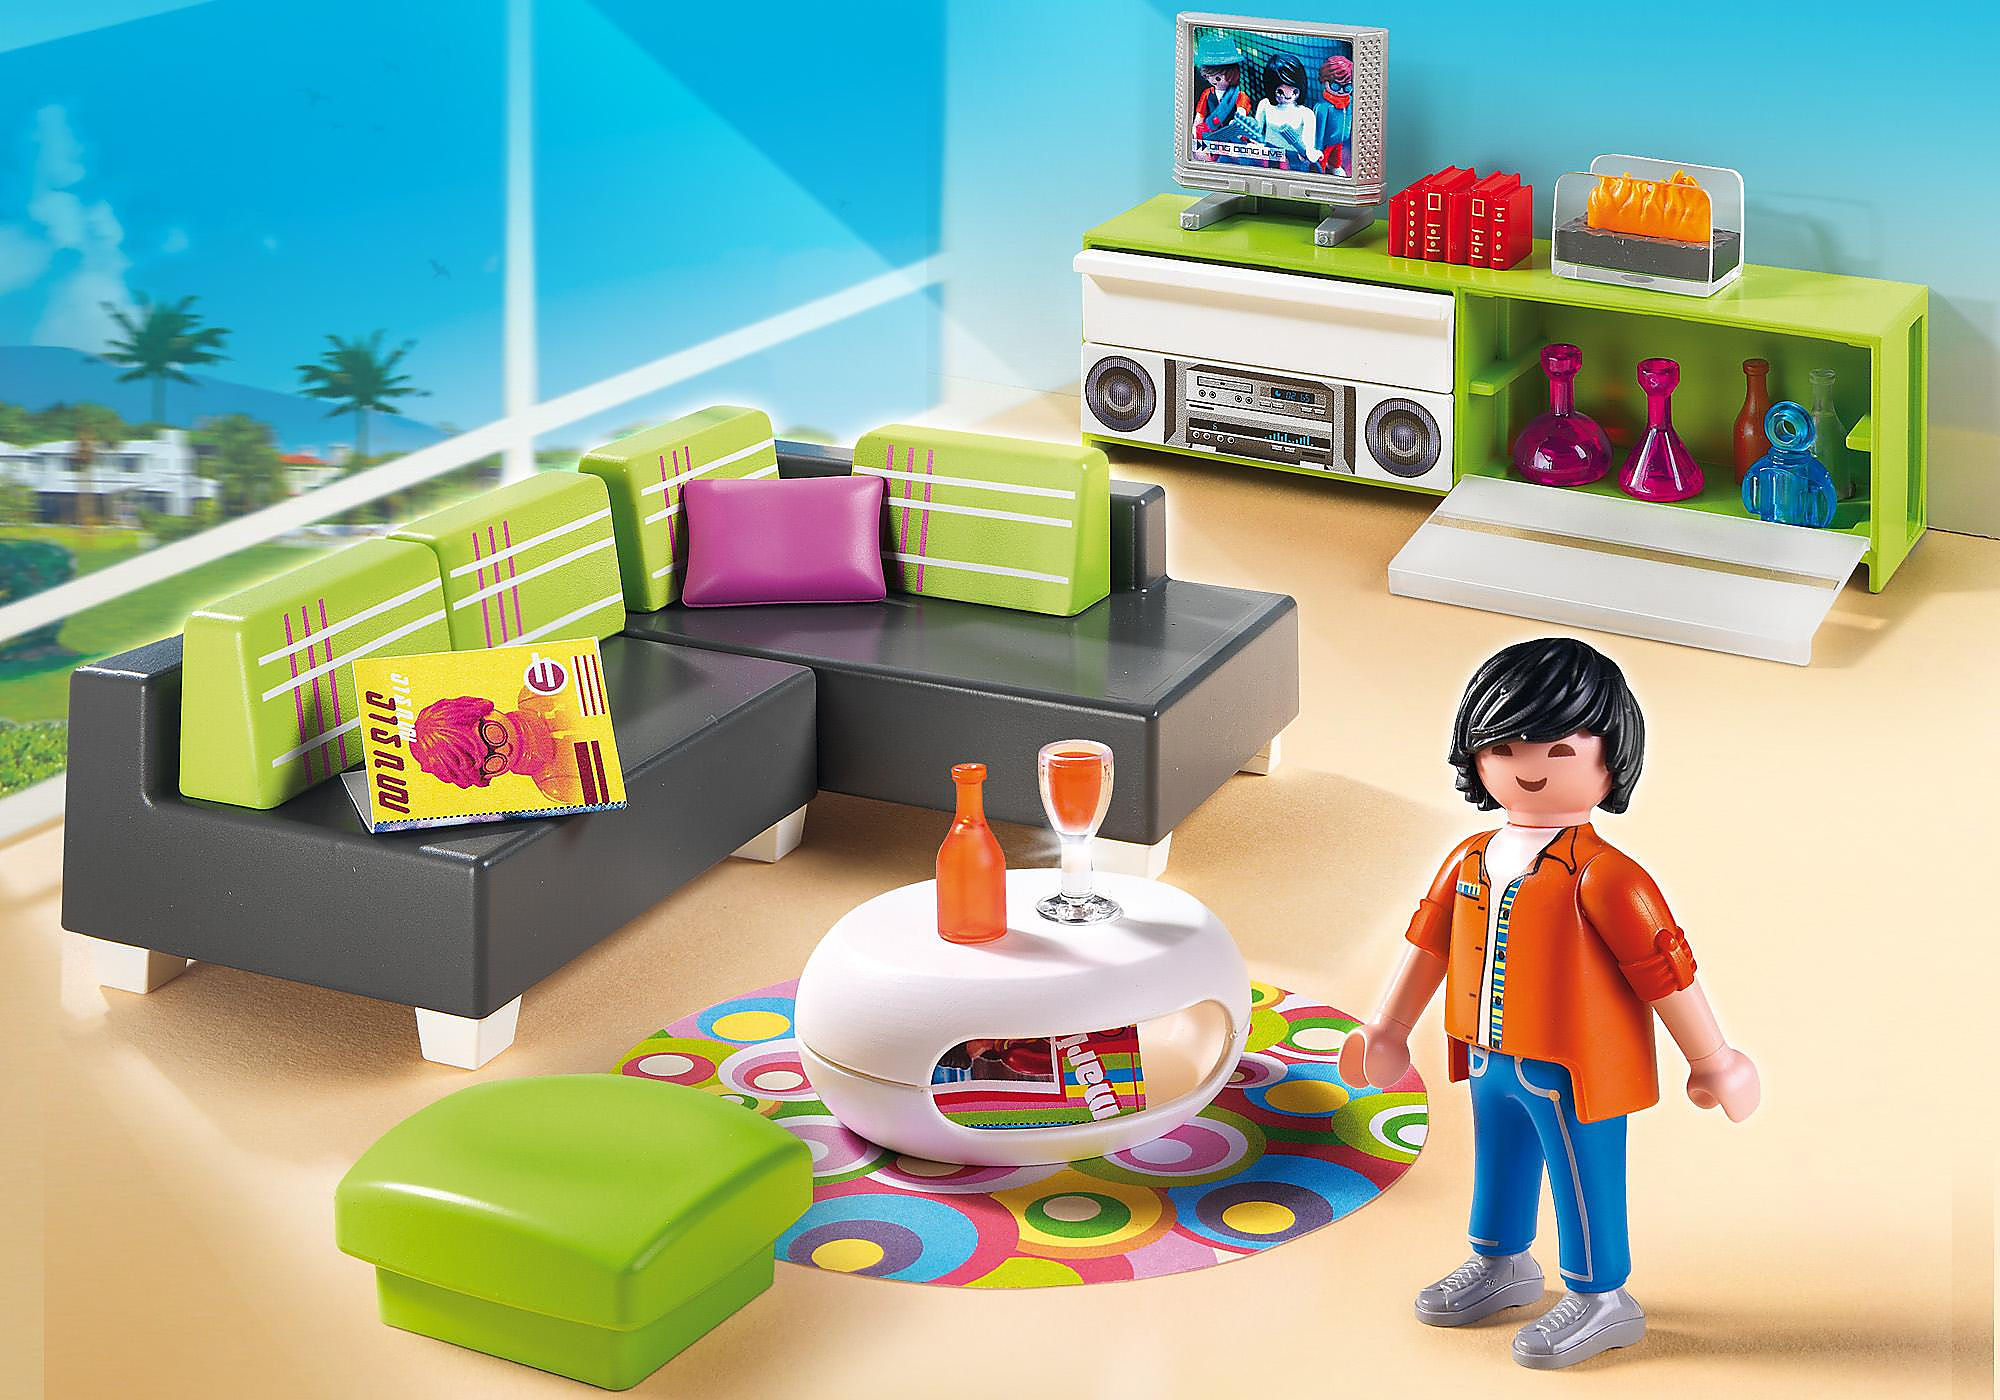  Playmobil Deluxe Teenager's Room : Toys & Games